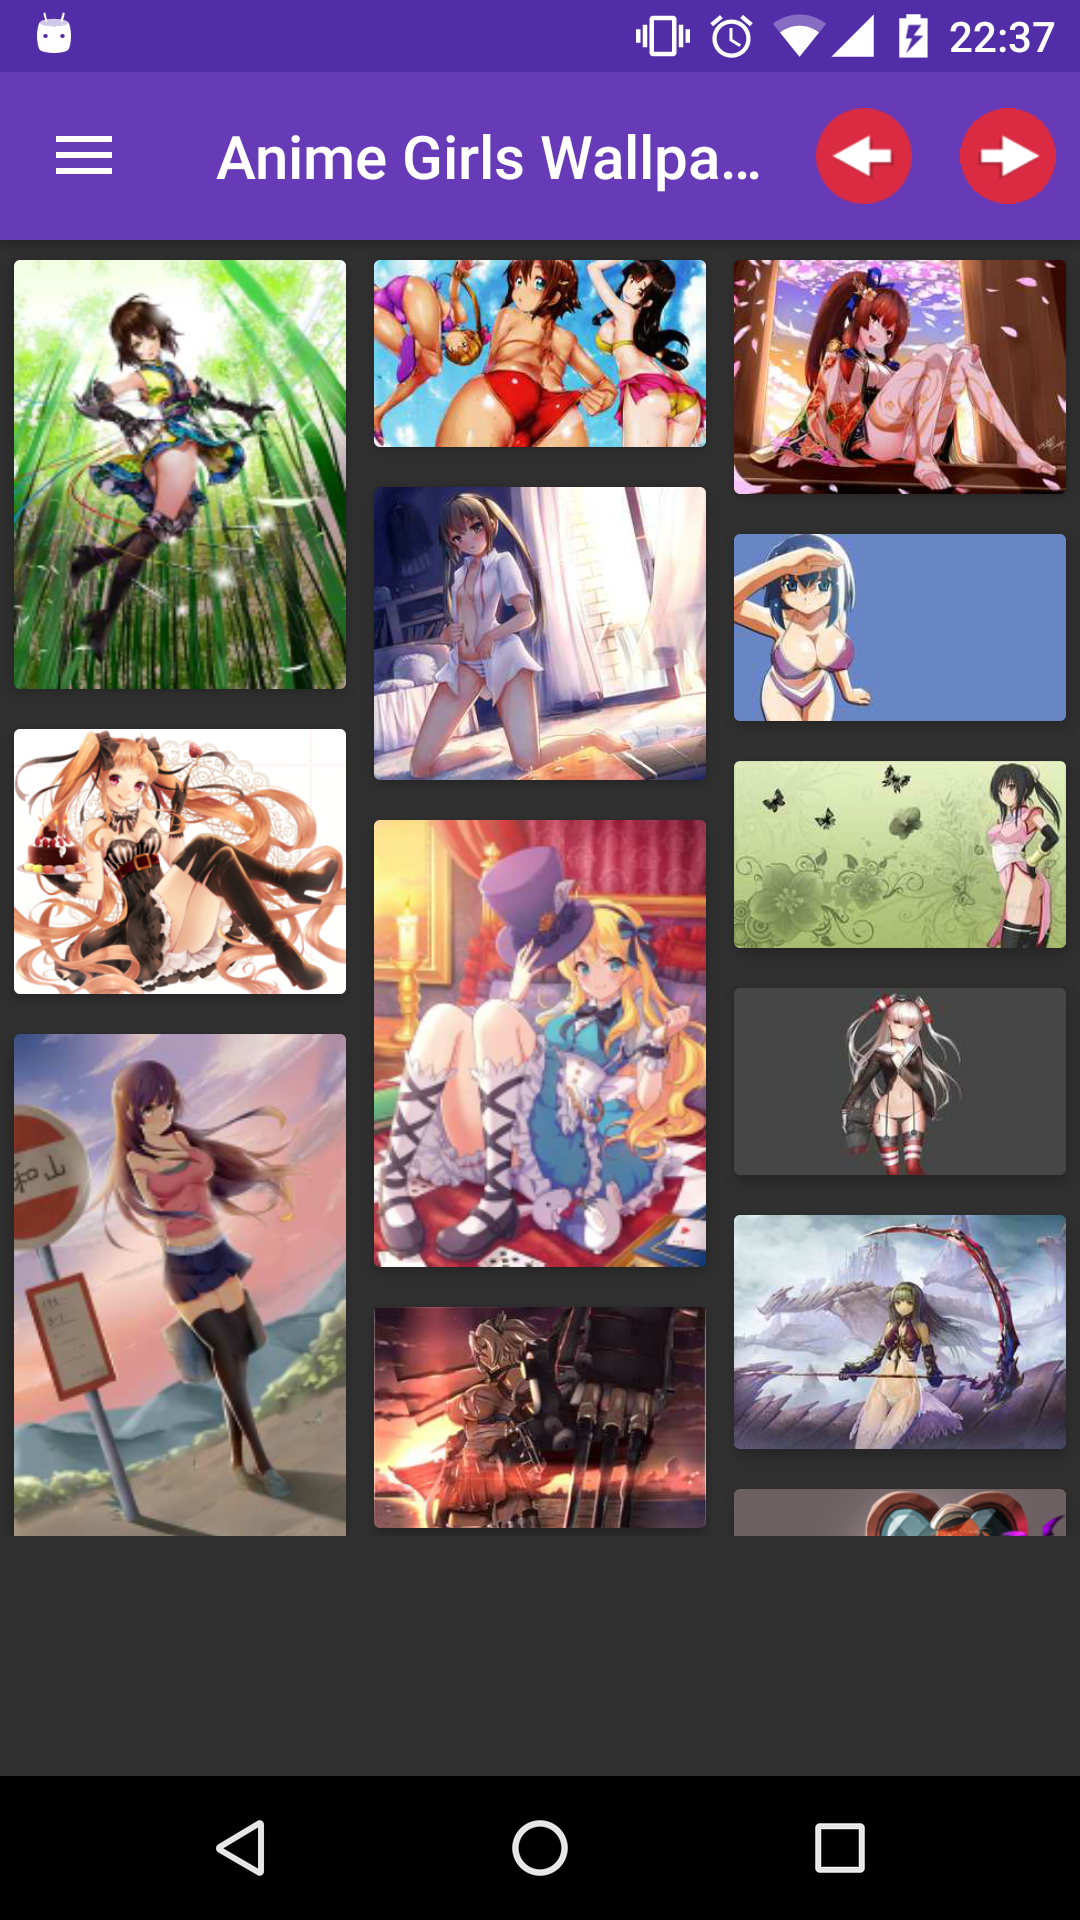 Anime Girls Backgrounds hentei,anime,sexy,apk,picture,gallery,apps,girls,backgrounds,best,app,wallpapers,porn,pic,erotic,images,android,star,photos,stars,henti,hentai